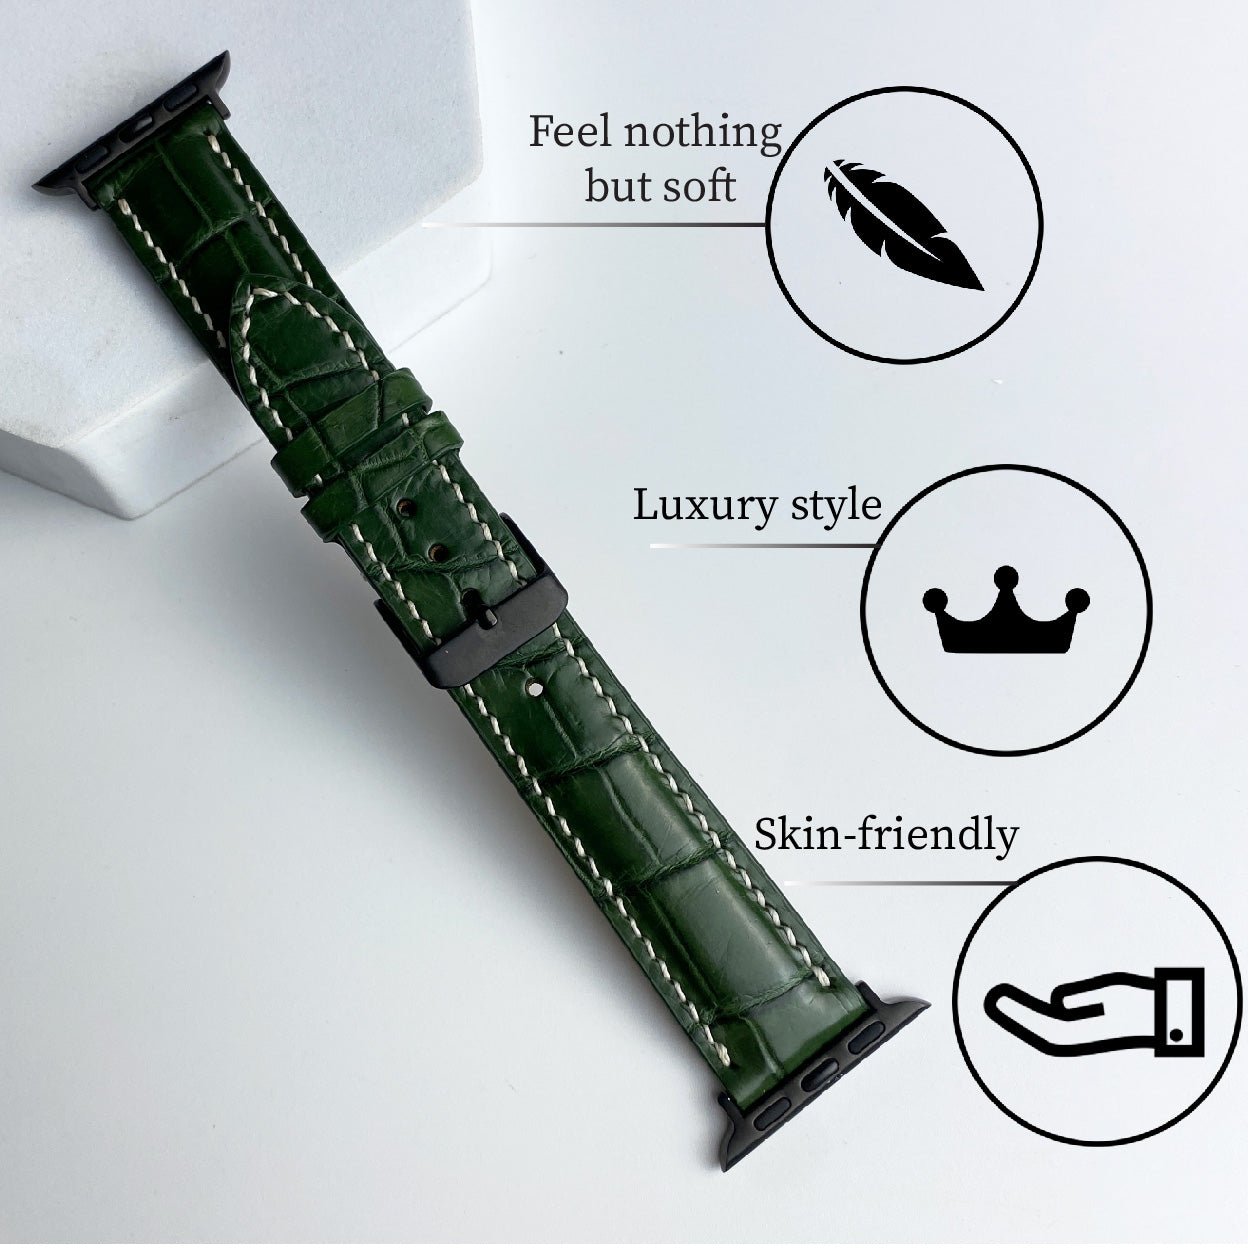 White Hand Stitching Green Alligator Leather Watch Band Compatible with Apple Watch IWatch Series 7 6 5 4 3 2 1 | AW-158 - Vinacreations